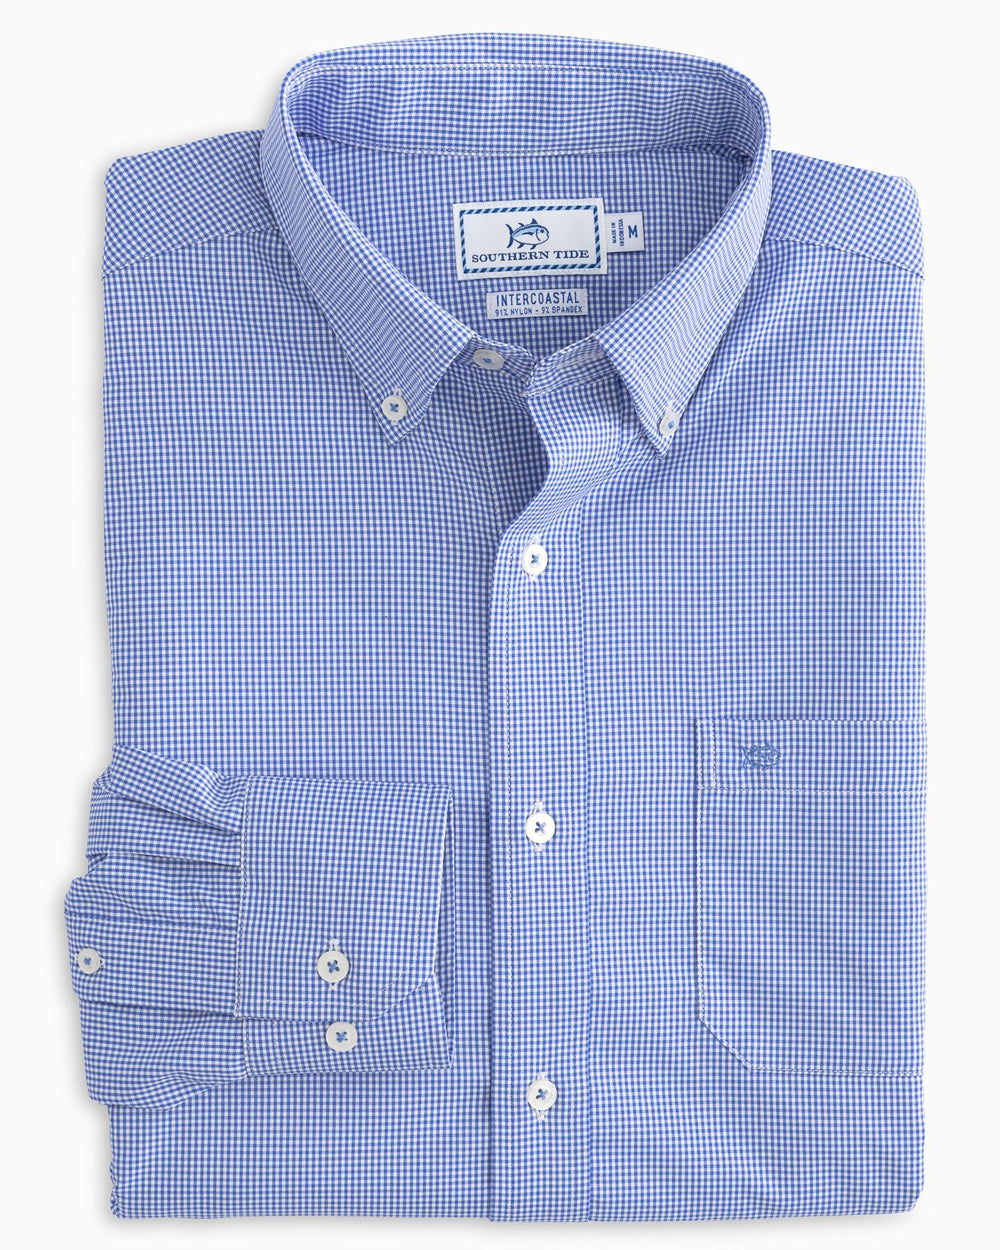 The front view of the Men's Navy Micro Gingham Intercoastal Performance Sport Shirt by Southern Tide - blue cove